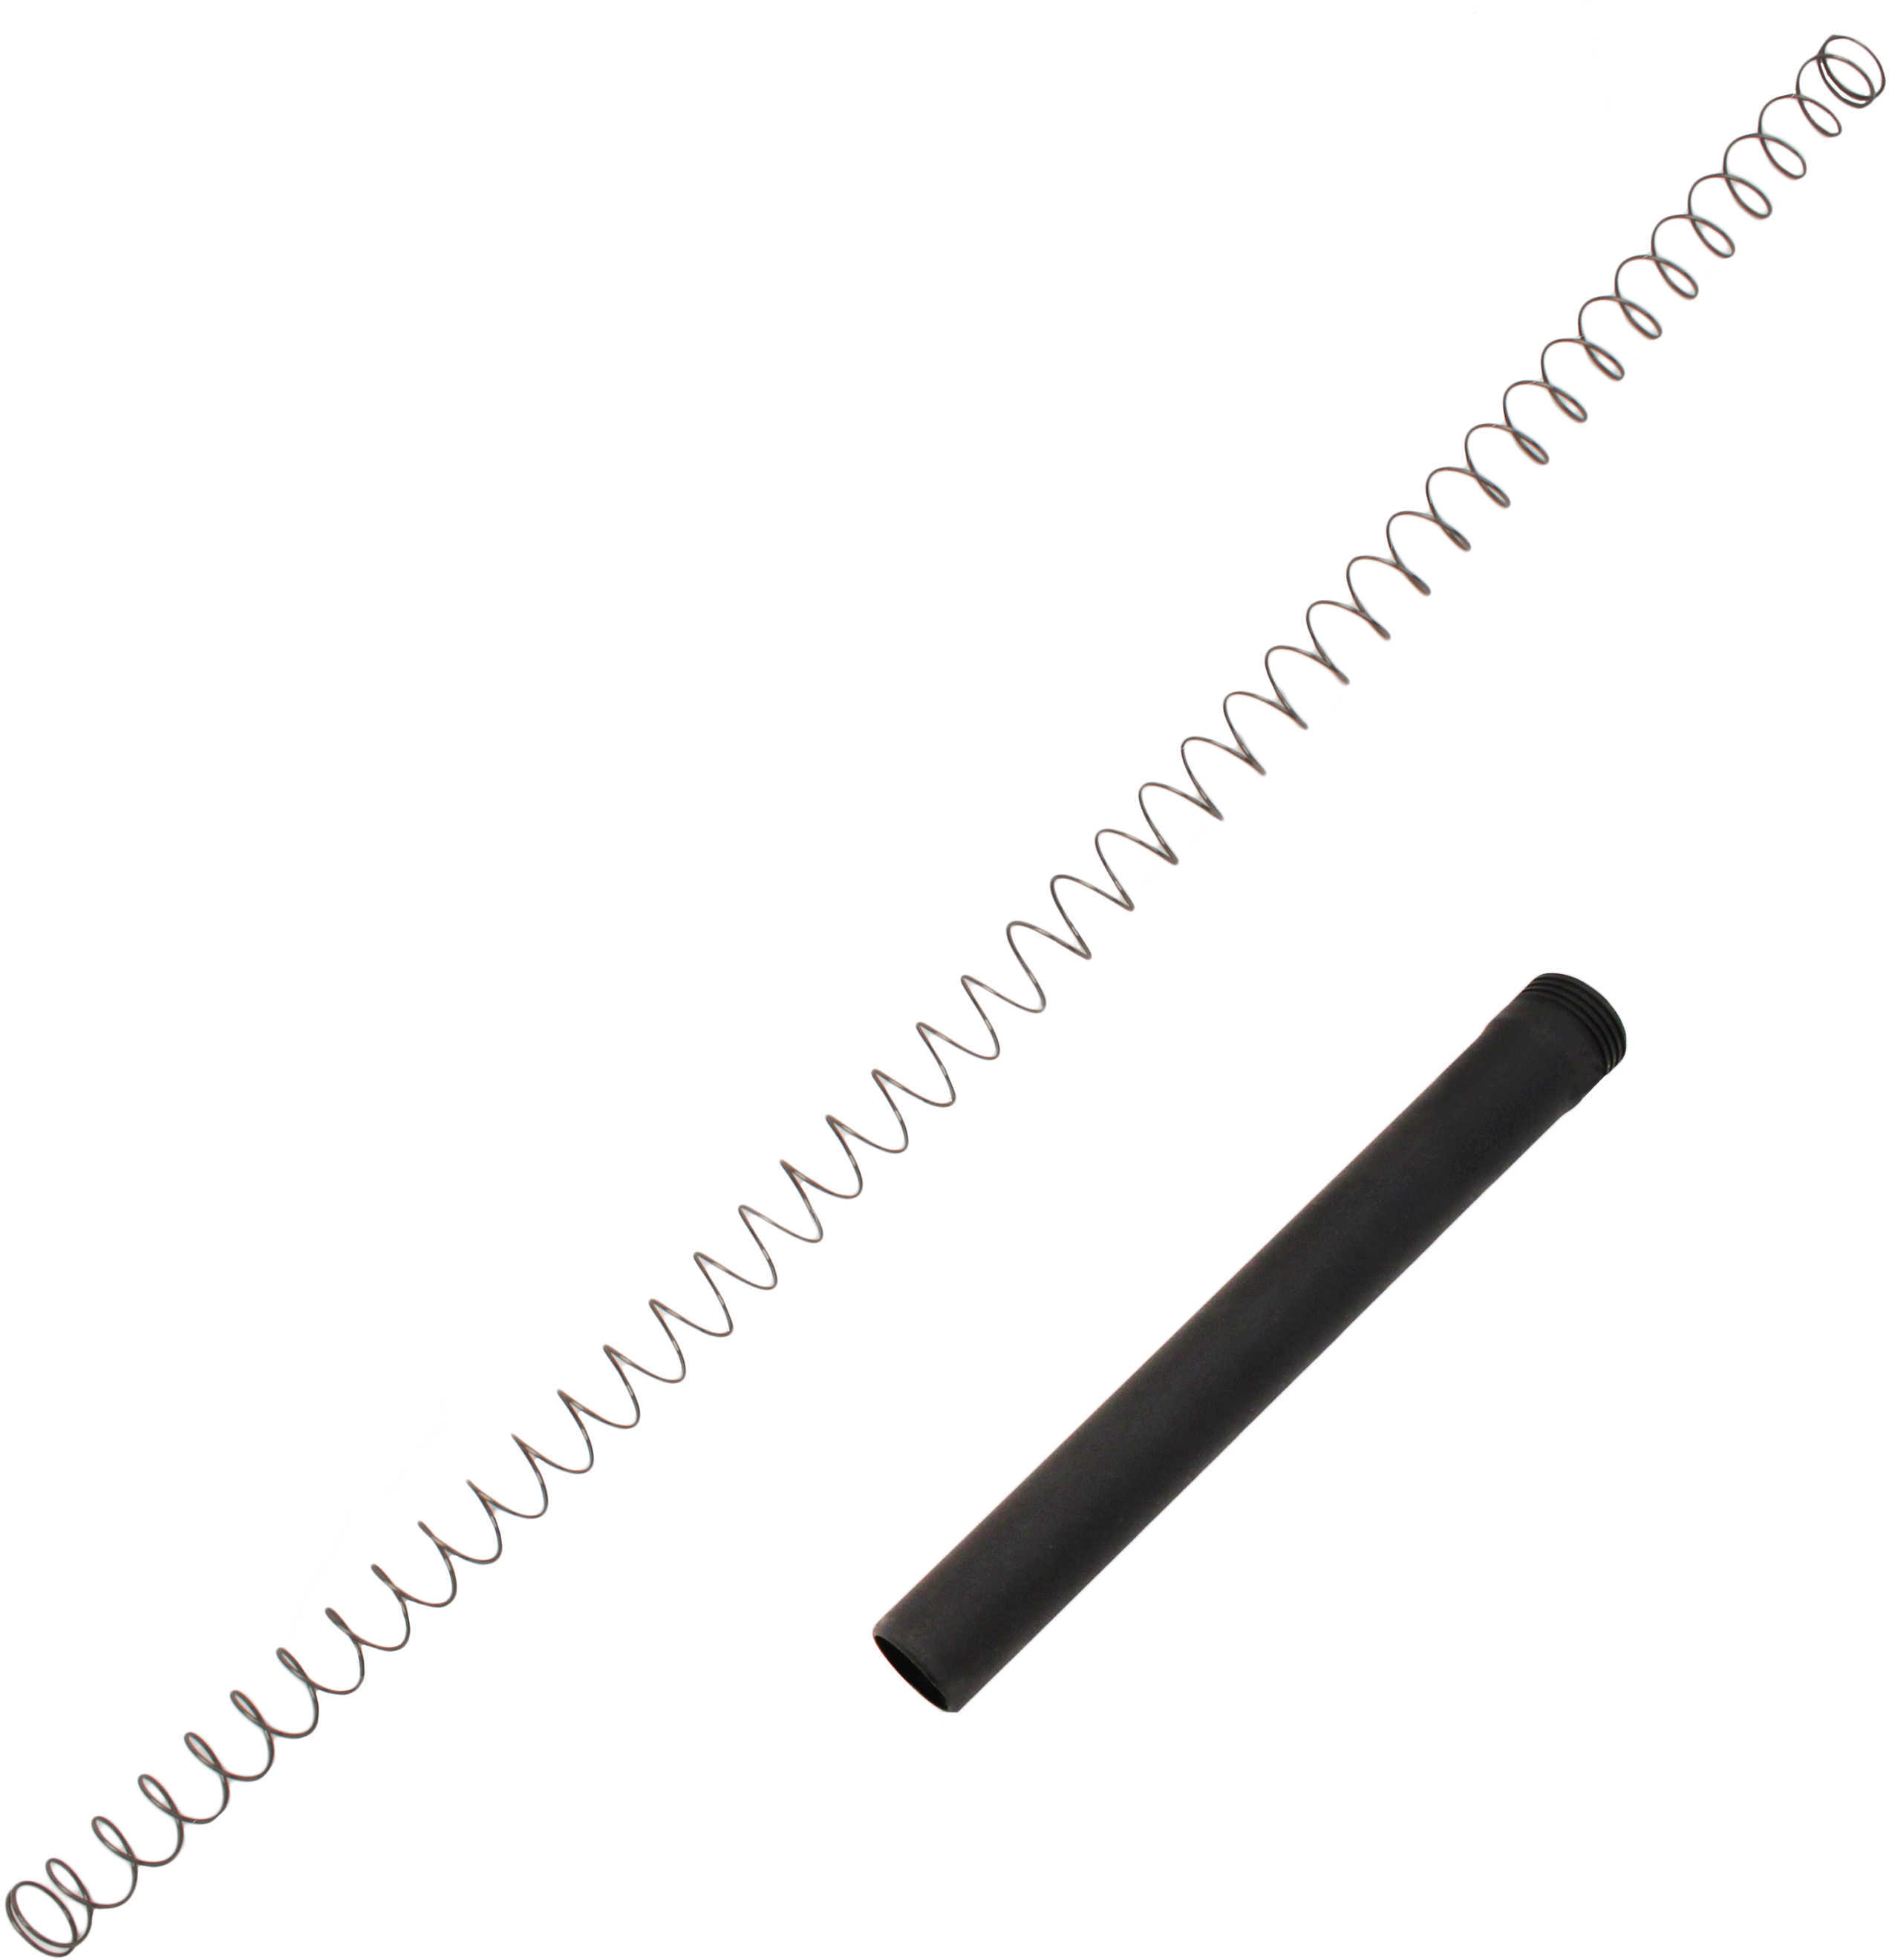 Pachmayr TacStar 8 Round Black Magazine Extension For Benelli M1/M2 Super Eagle Md: 1081189